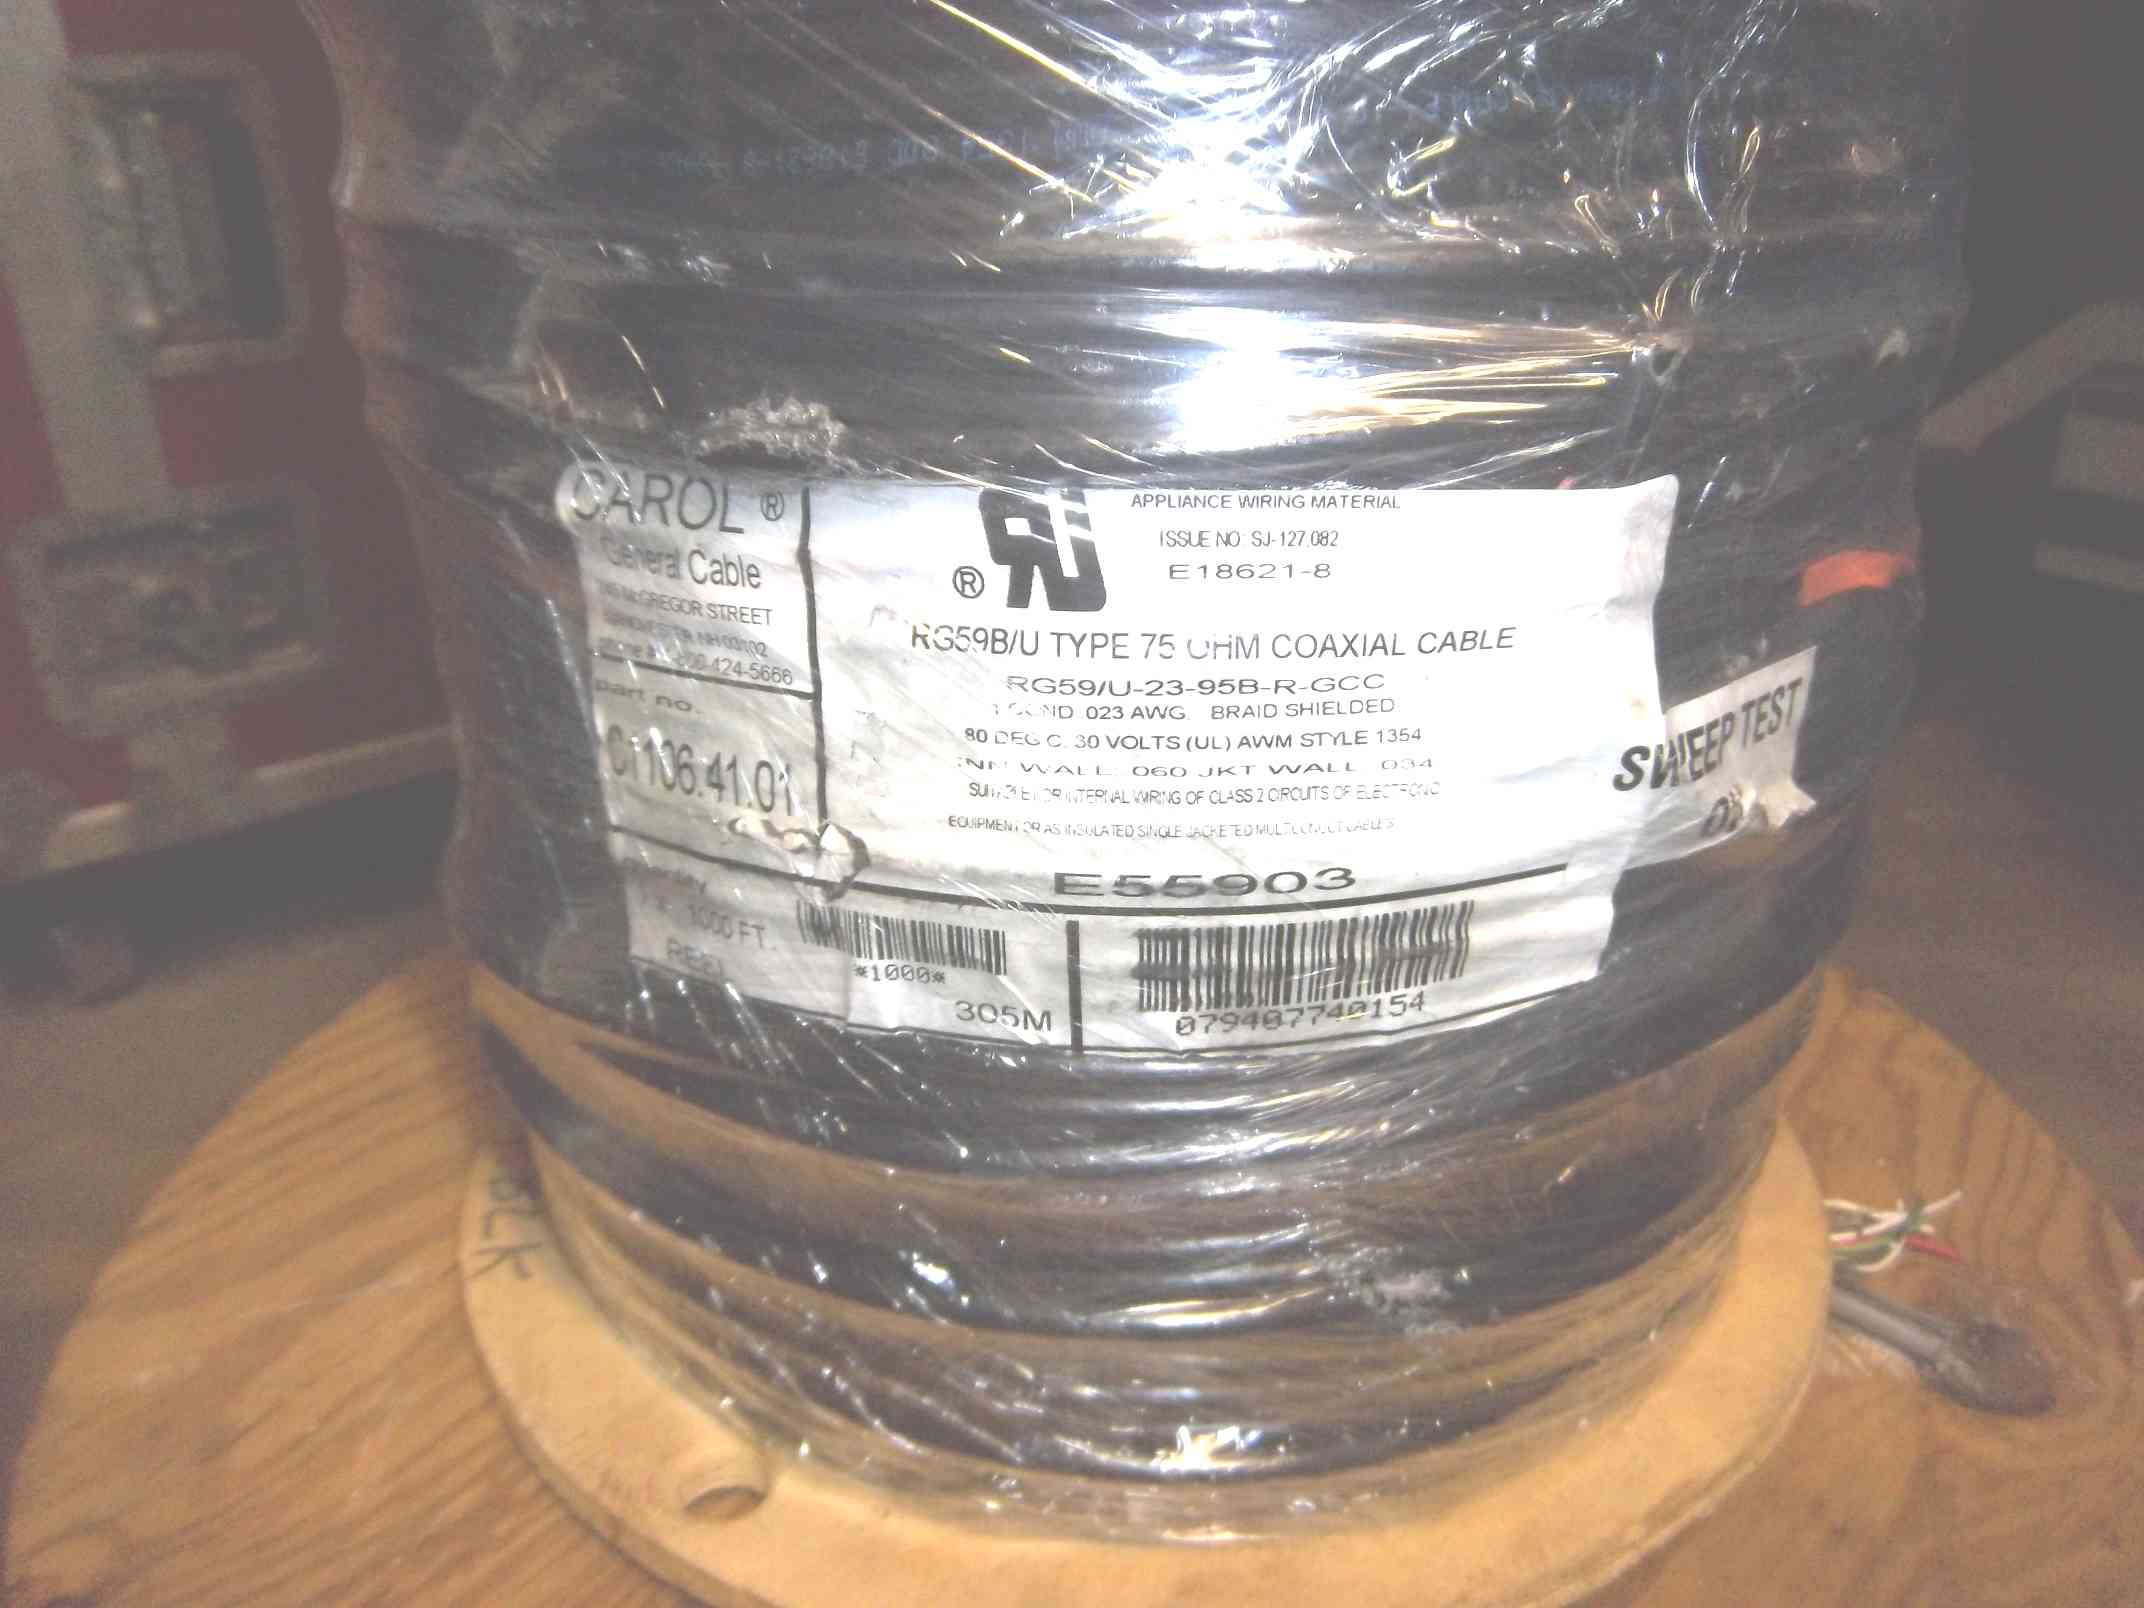 New 75 ohm cable for any video installation video coax cable spool 1000 ft feet cable reel coax spool